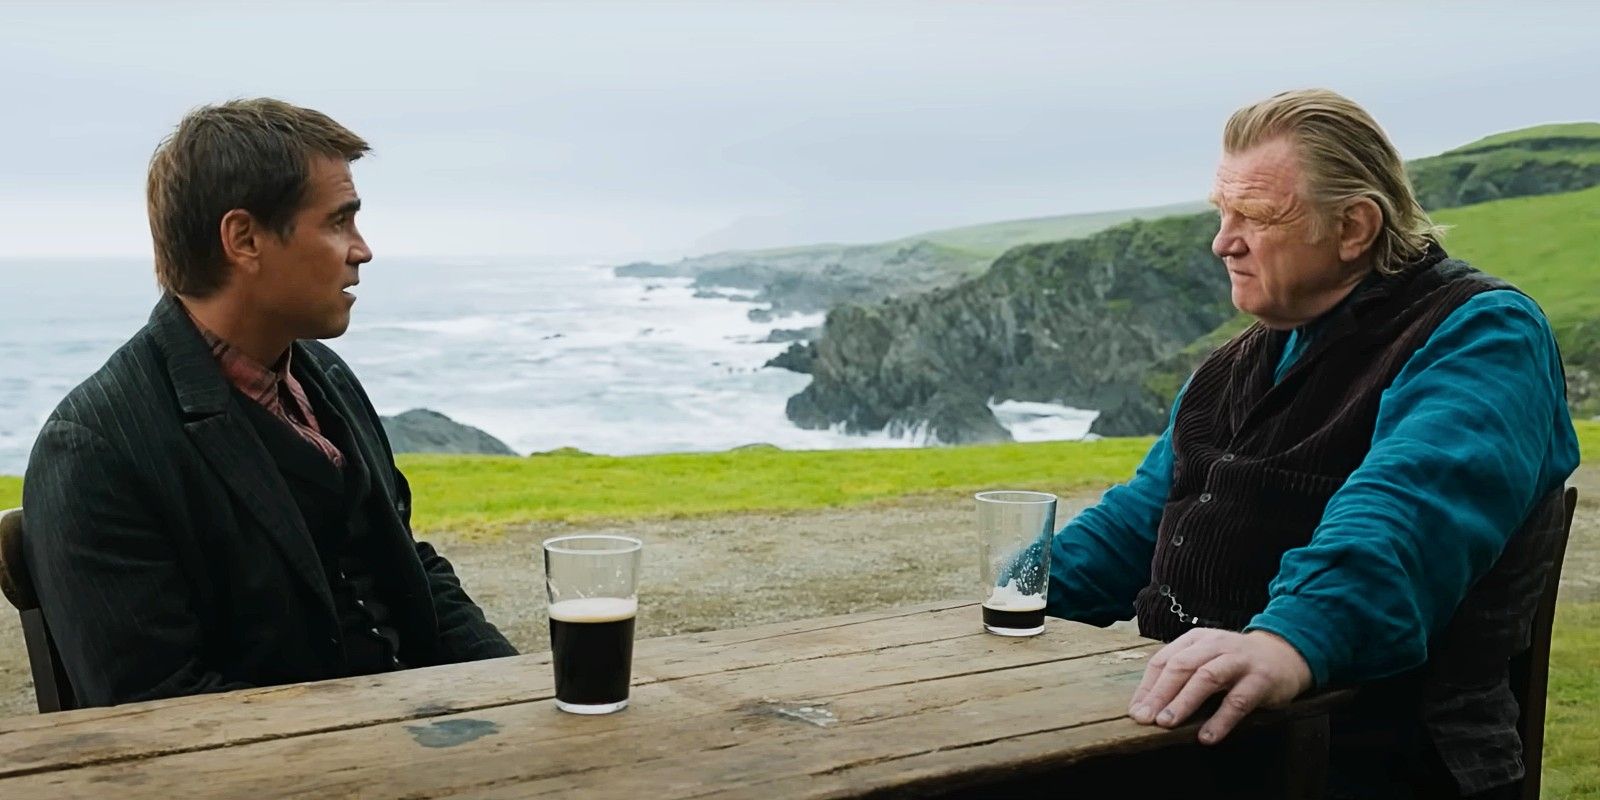 Colin Farrell as Pádraic and Brendan Gleeson as Colm in The Banshees of Inisherin